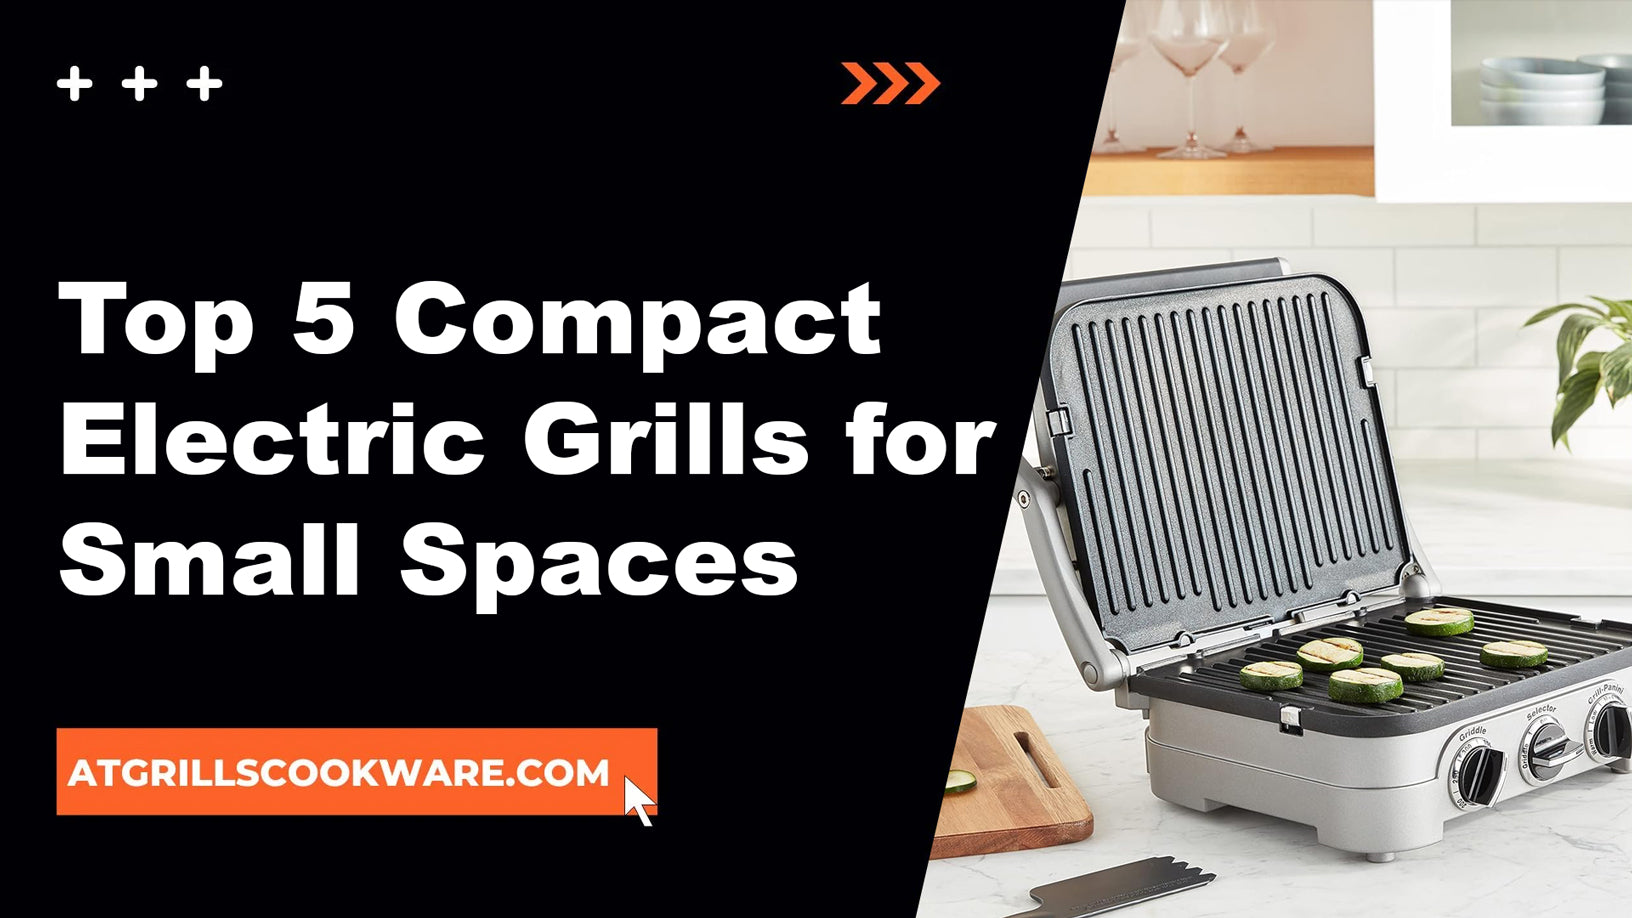 The Best Compact Electric Grills for Small Spaces